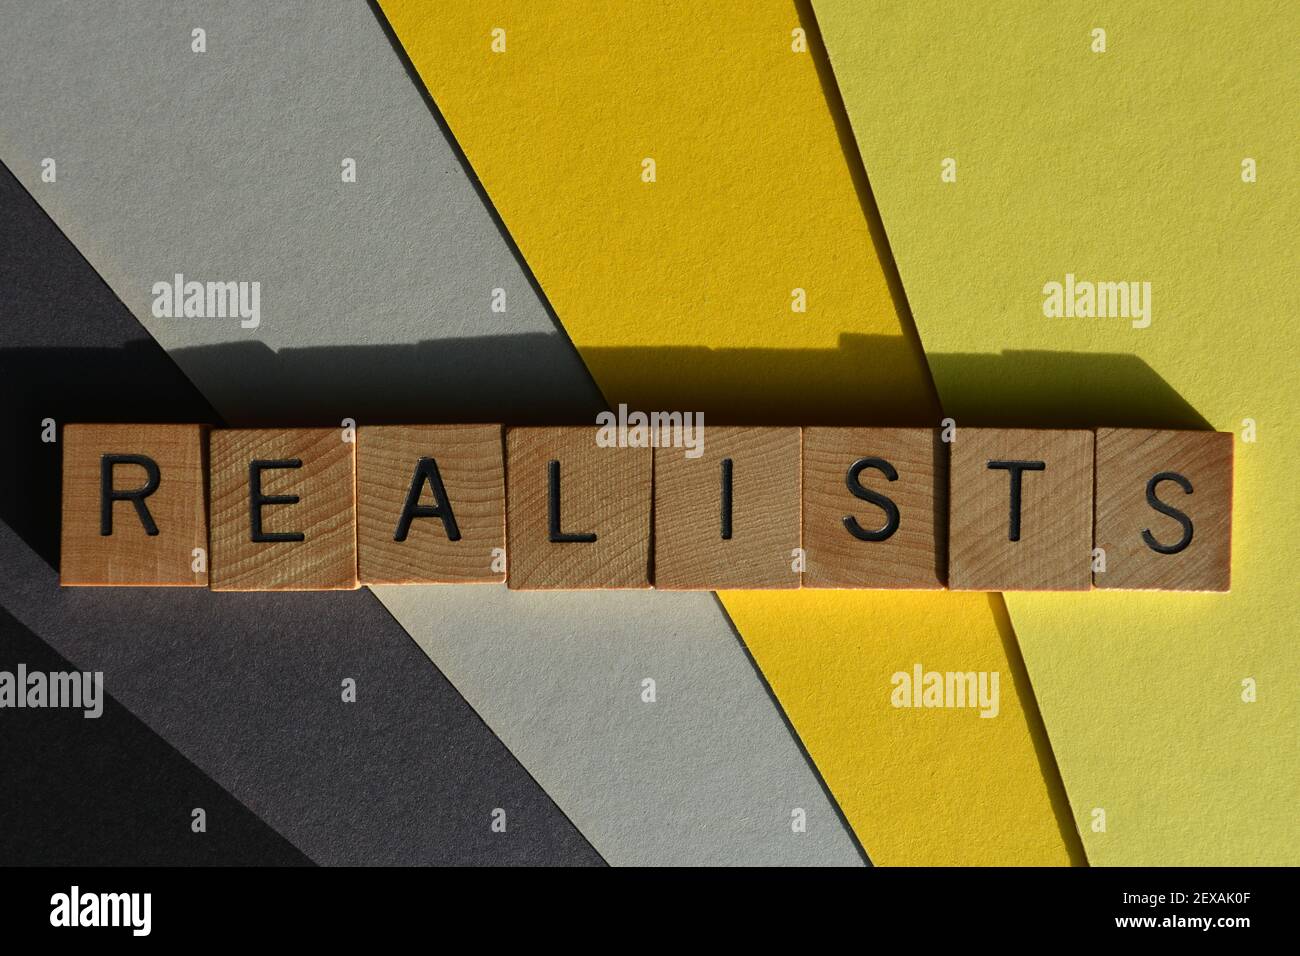 Realists, word in wooden alphabet letters isolated on yellow and grey background Stock Photo